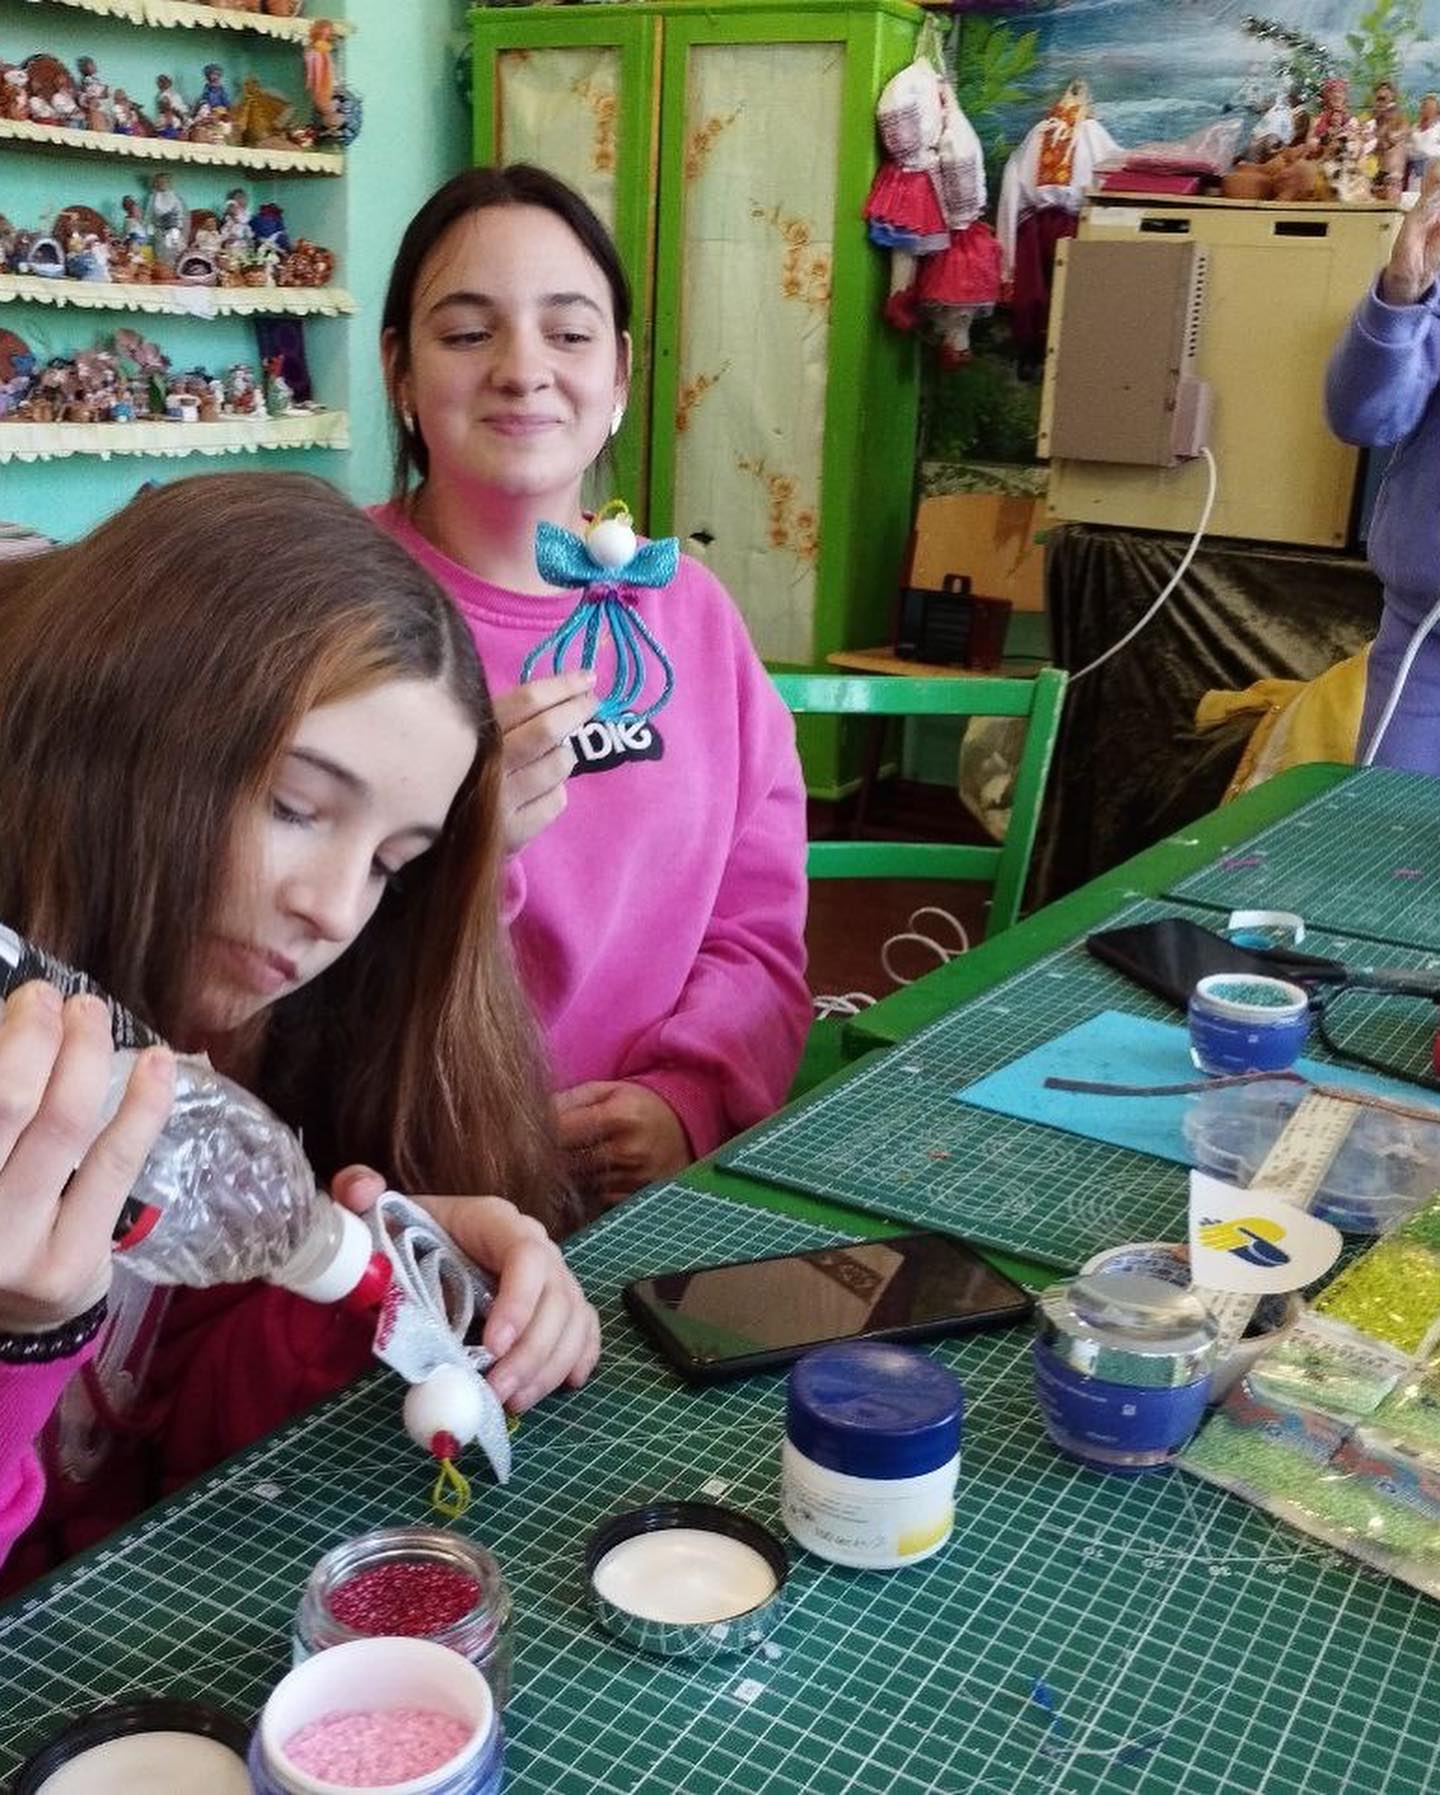 A group of girls are sitting at a table making crafts.